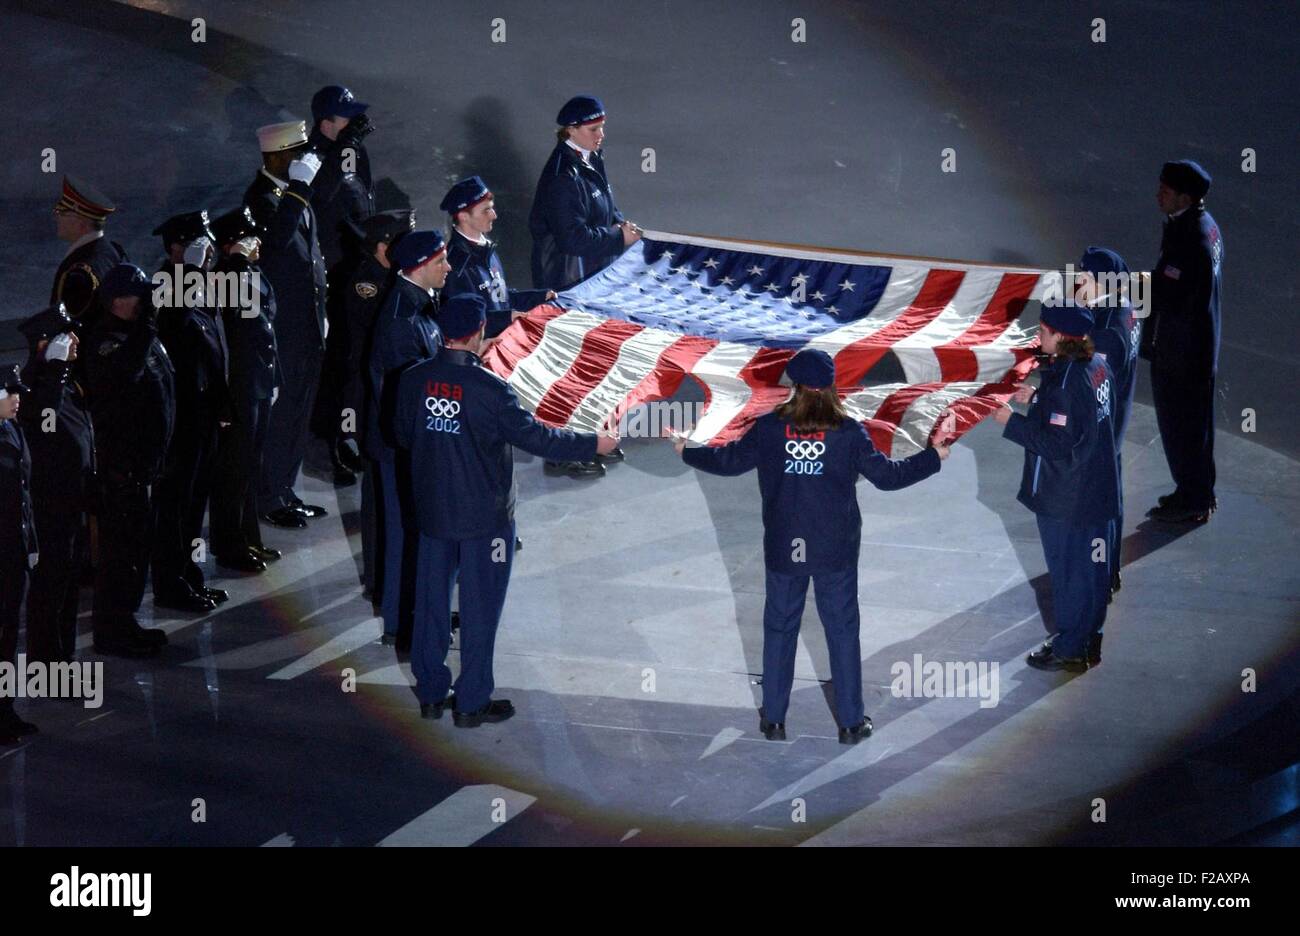 The US Olympic Team holds the American flag that flew over the Ground Zero on Sept. 11, 2001. Firefighters took the flag from a Stock Photo